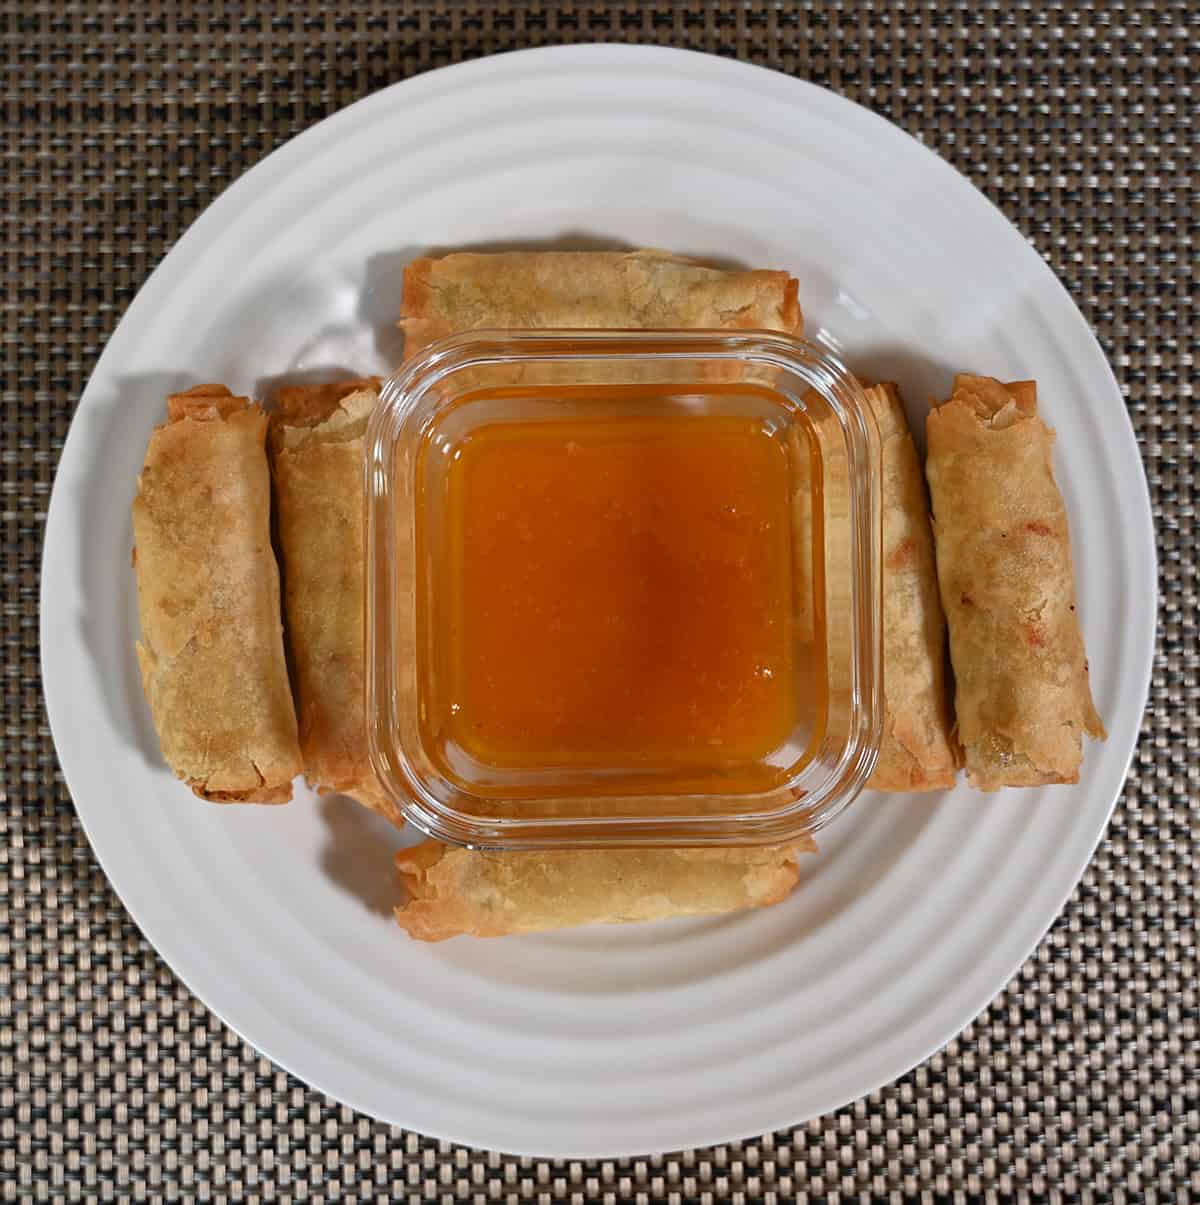 Top down image of a bowl of plum sauce in the center of a plate with six spring rolls surrounding it.